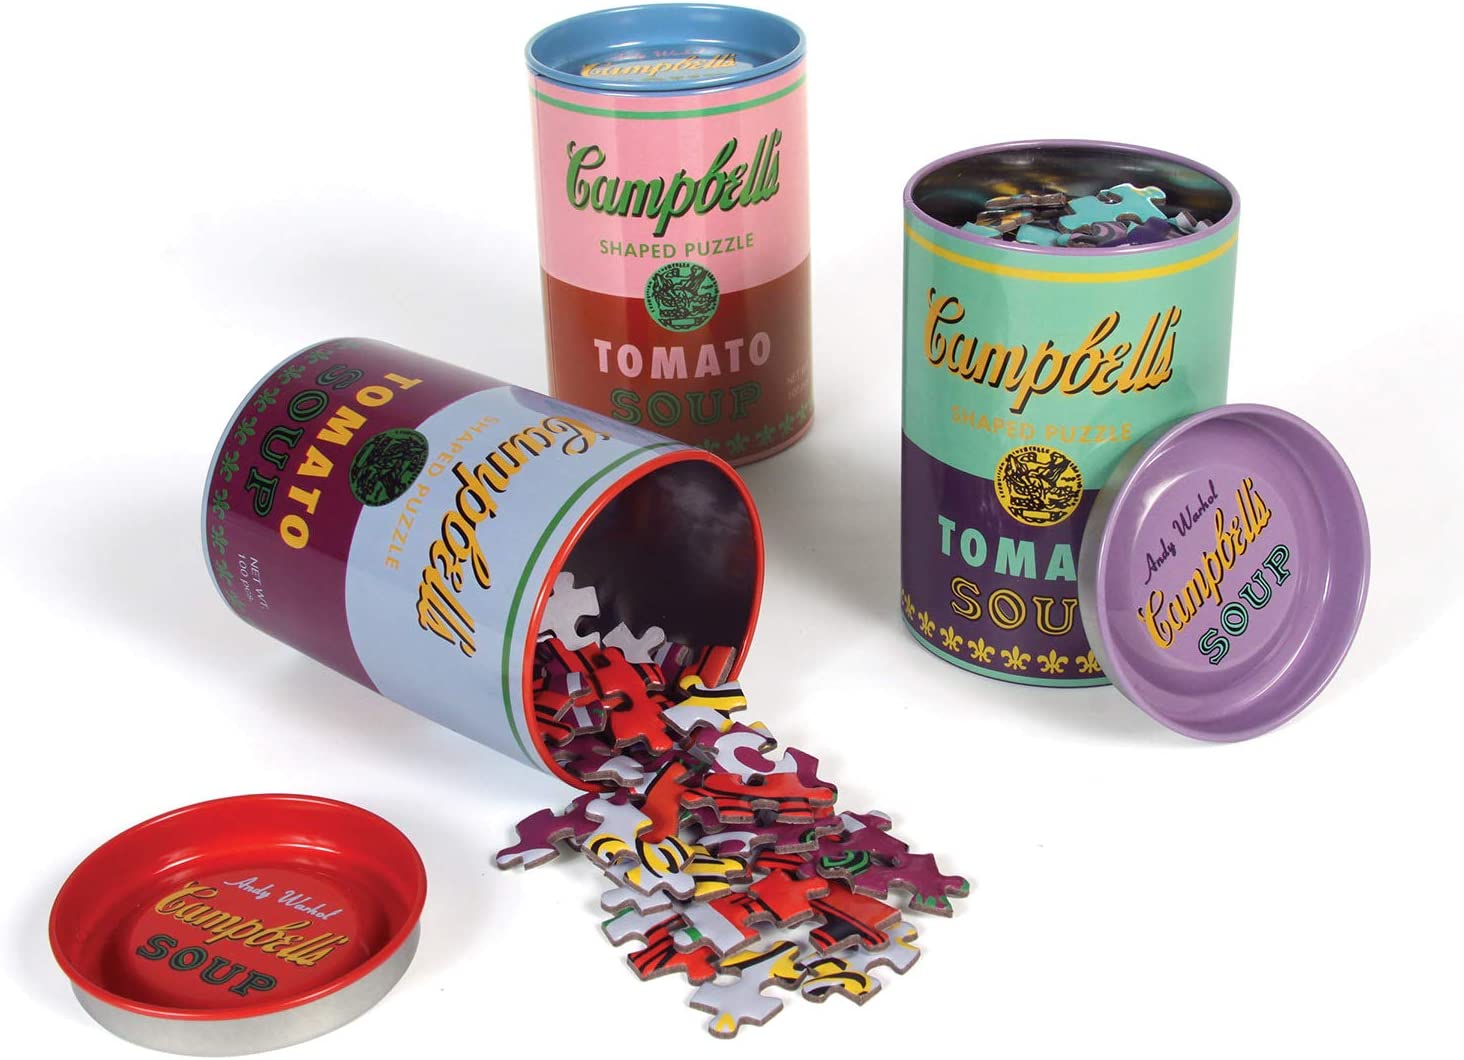 Andy Warhol Soup Cans Shaped Jigsaw Puzzles